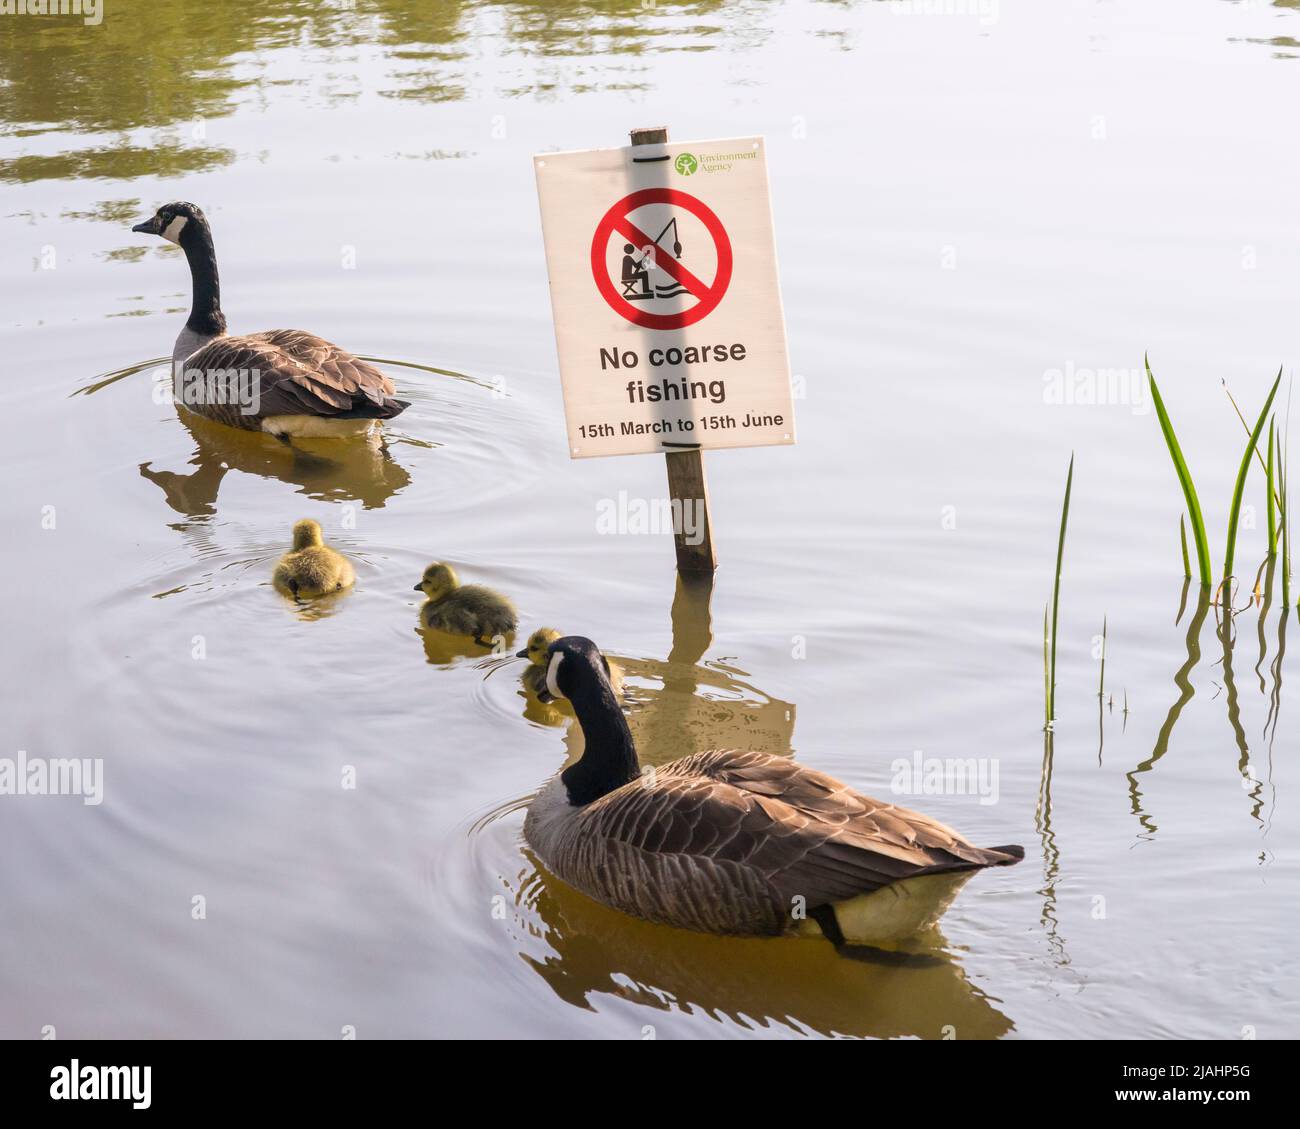 A family of Canada geese (Branta canadensis), two adults and three goslings, passing a no coarse fishing sign on Southampton Common Stock Photo